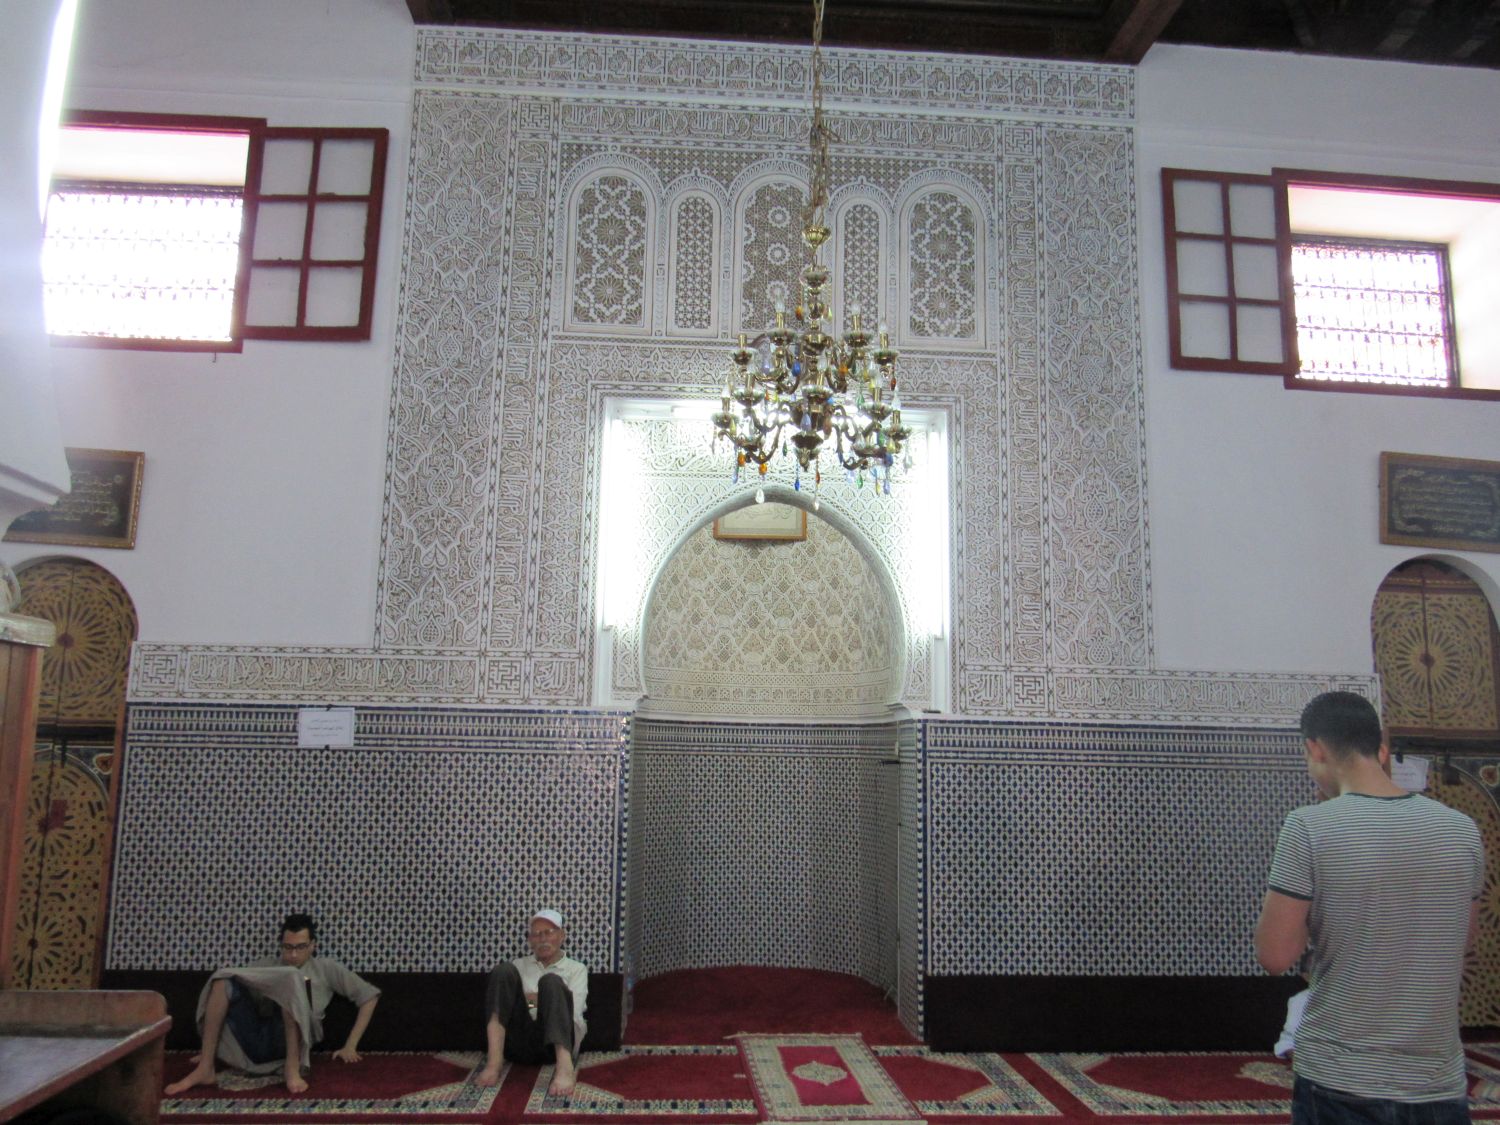 Interior view, mihrab and qibla wall with elaborate stucco decoration